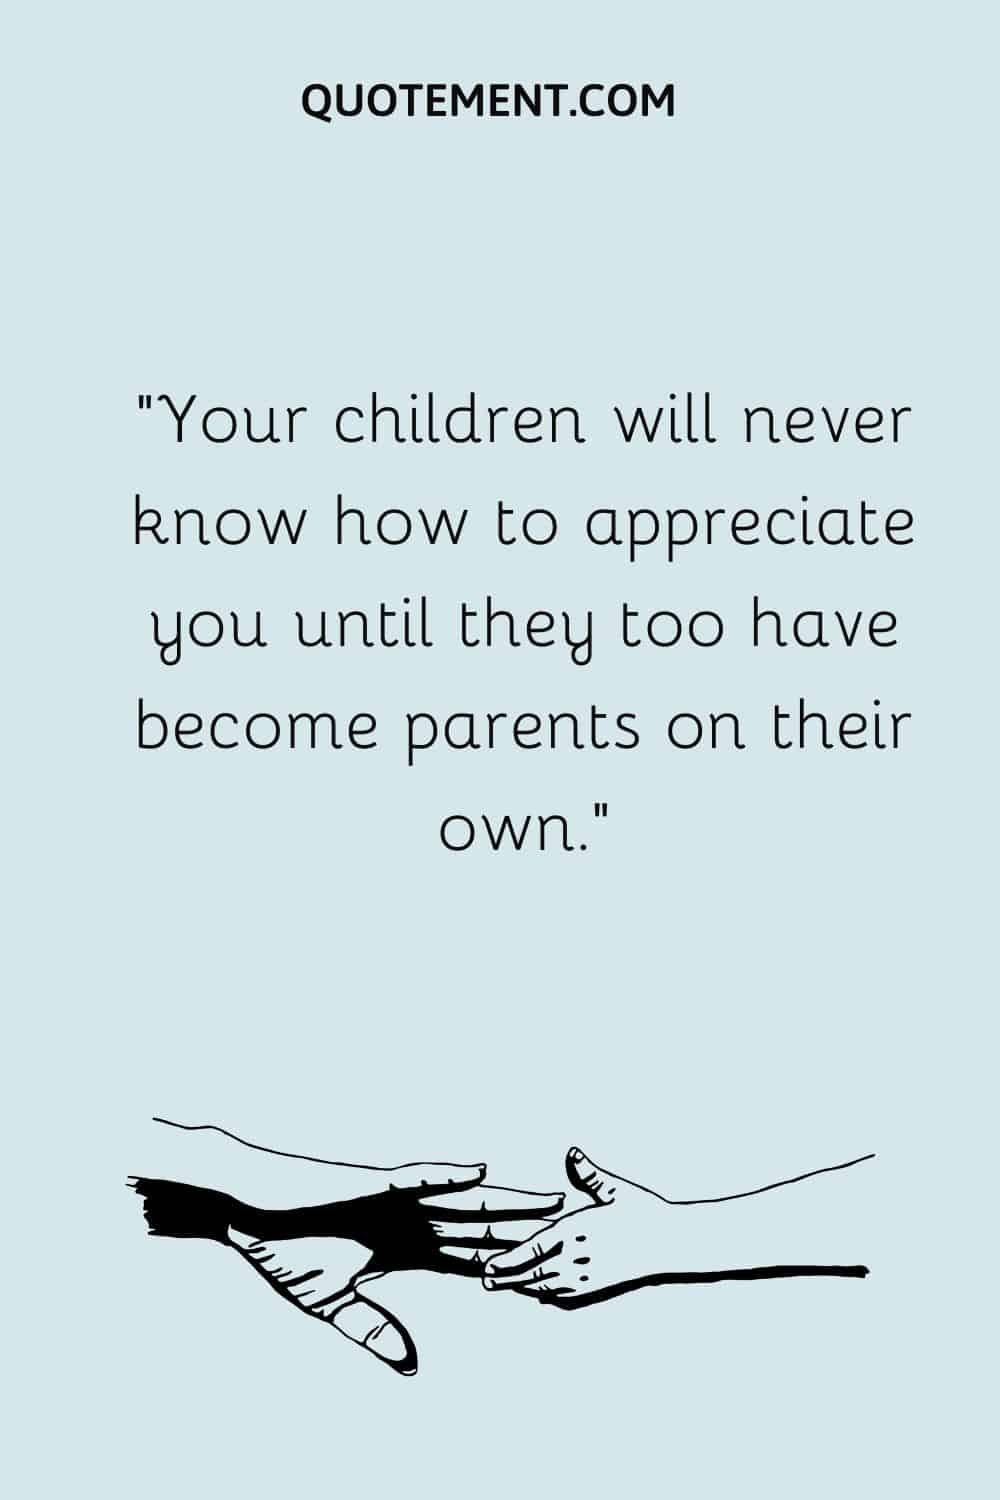 Your children will never know how to appreciate you until they too have become parents on their own